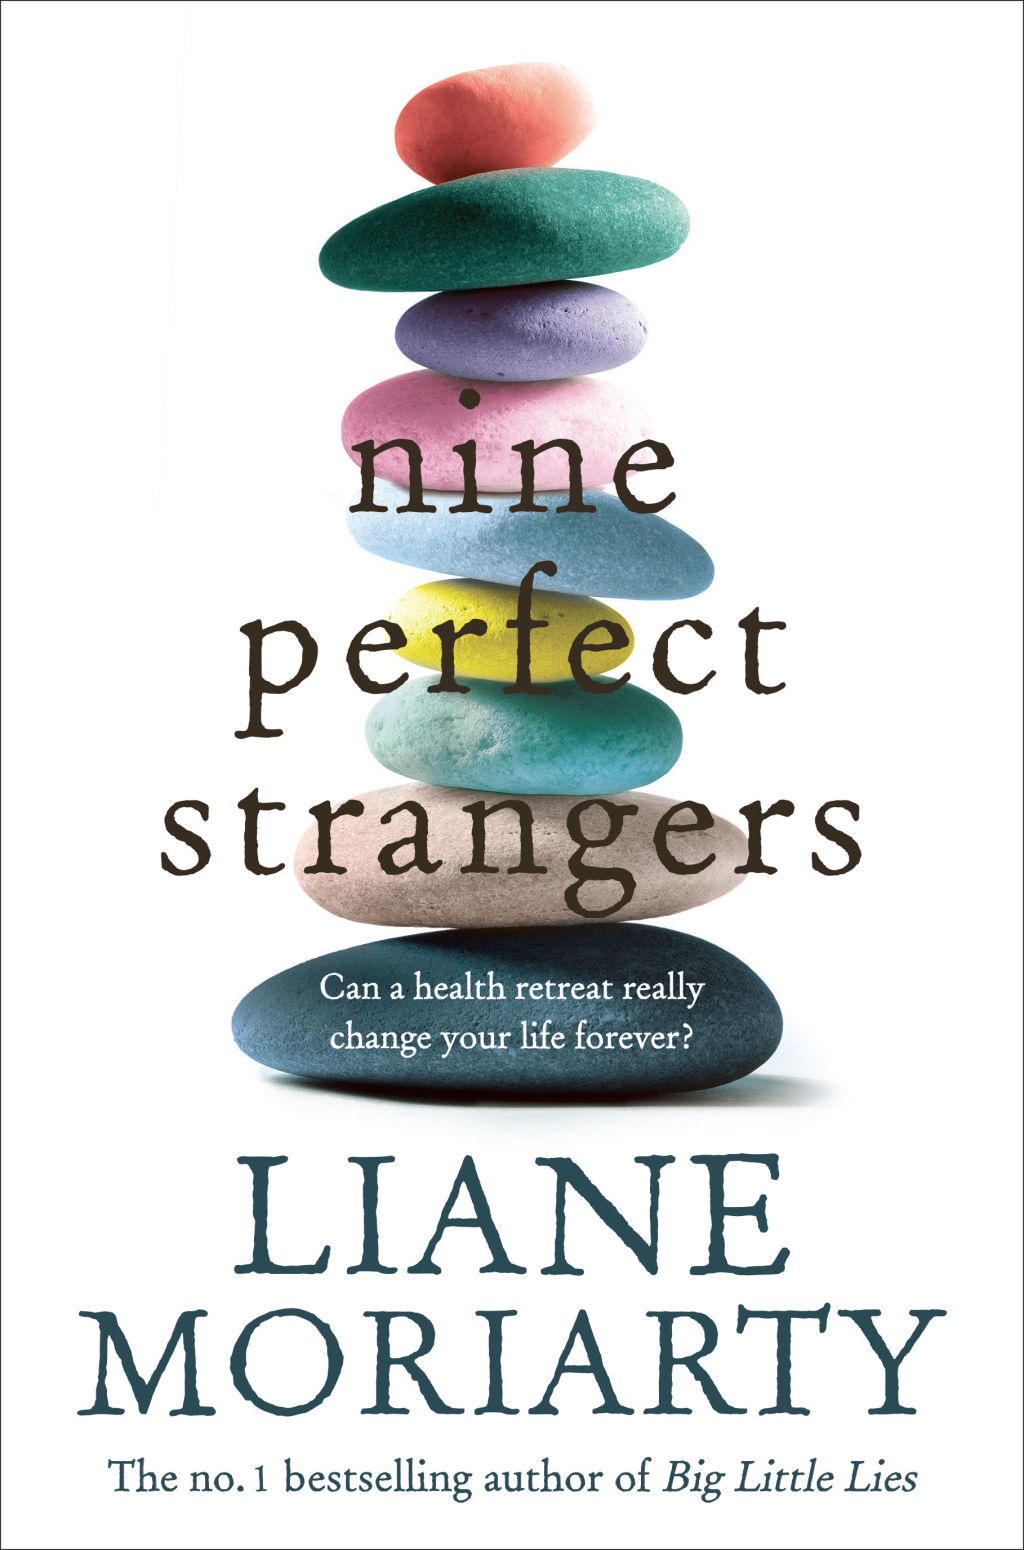 book review of 9 perfect strangers